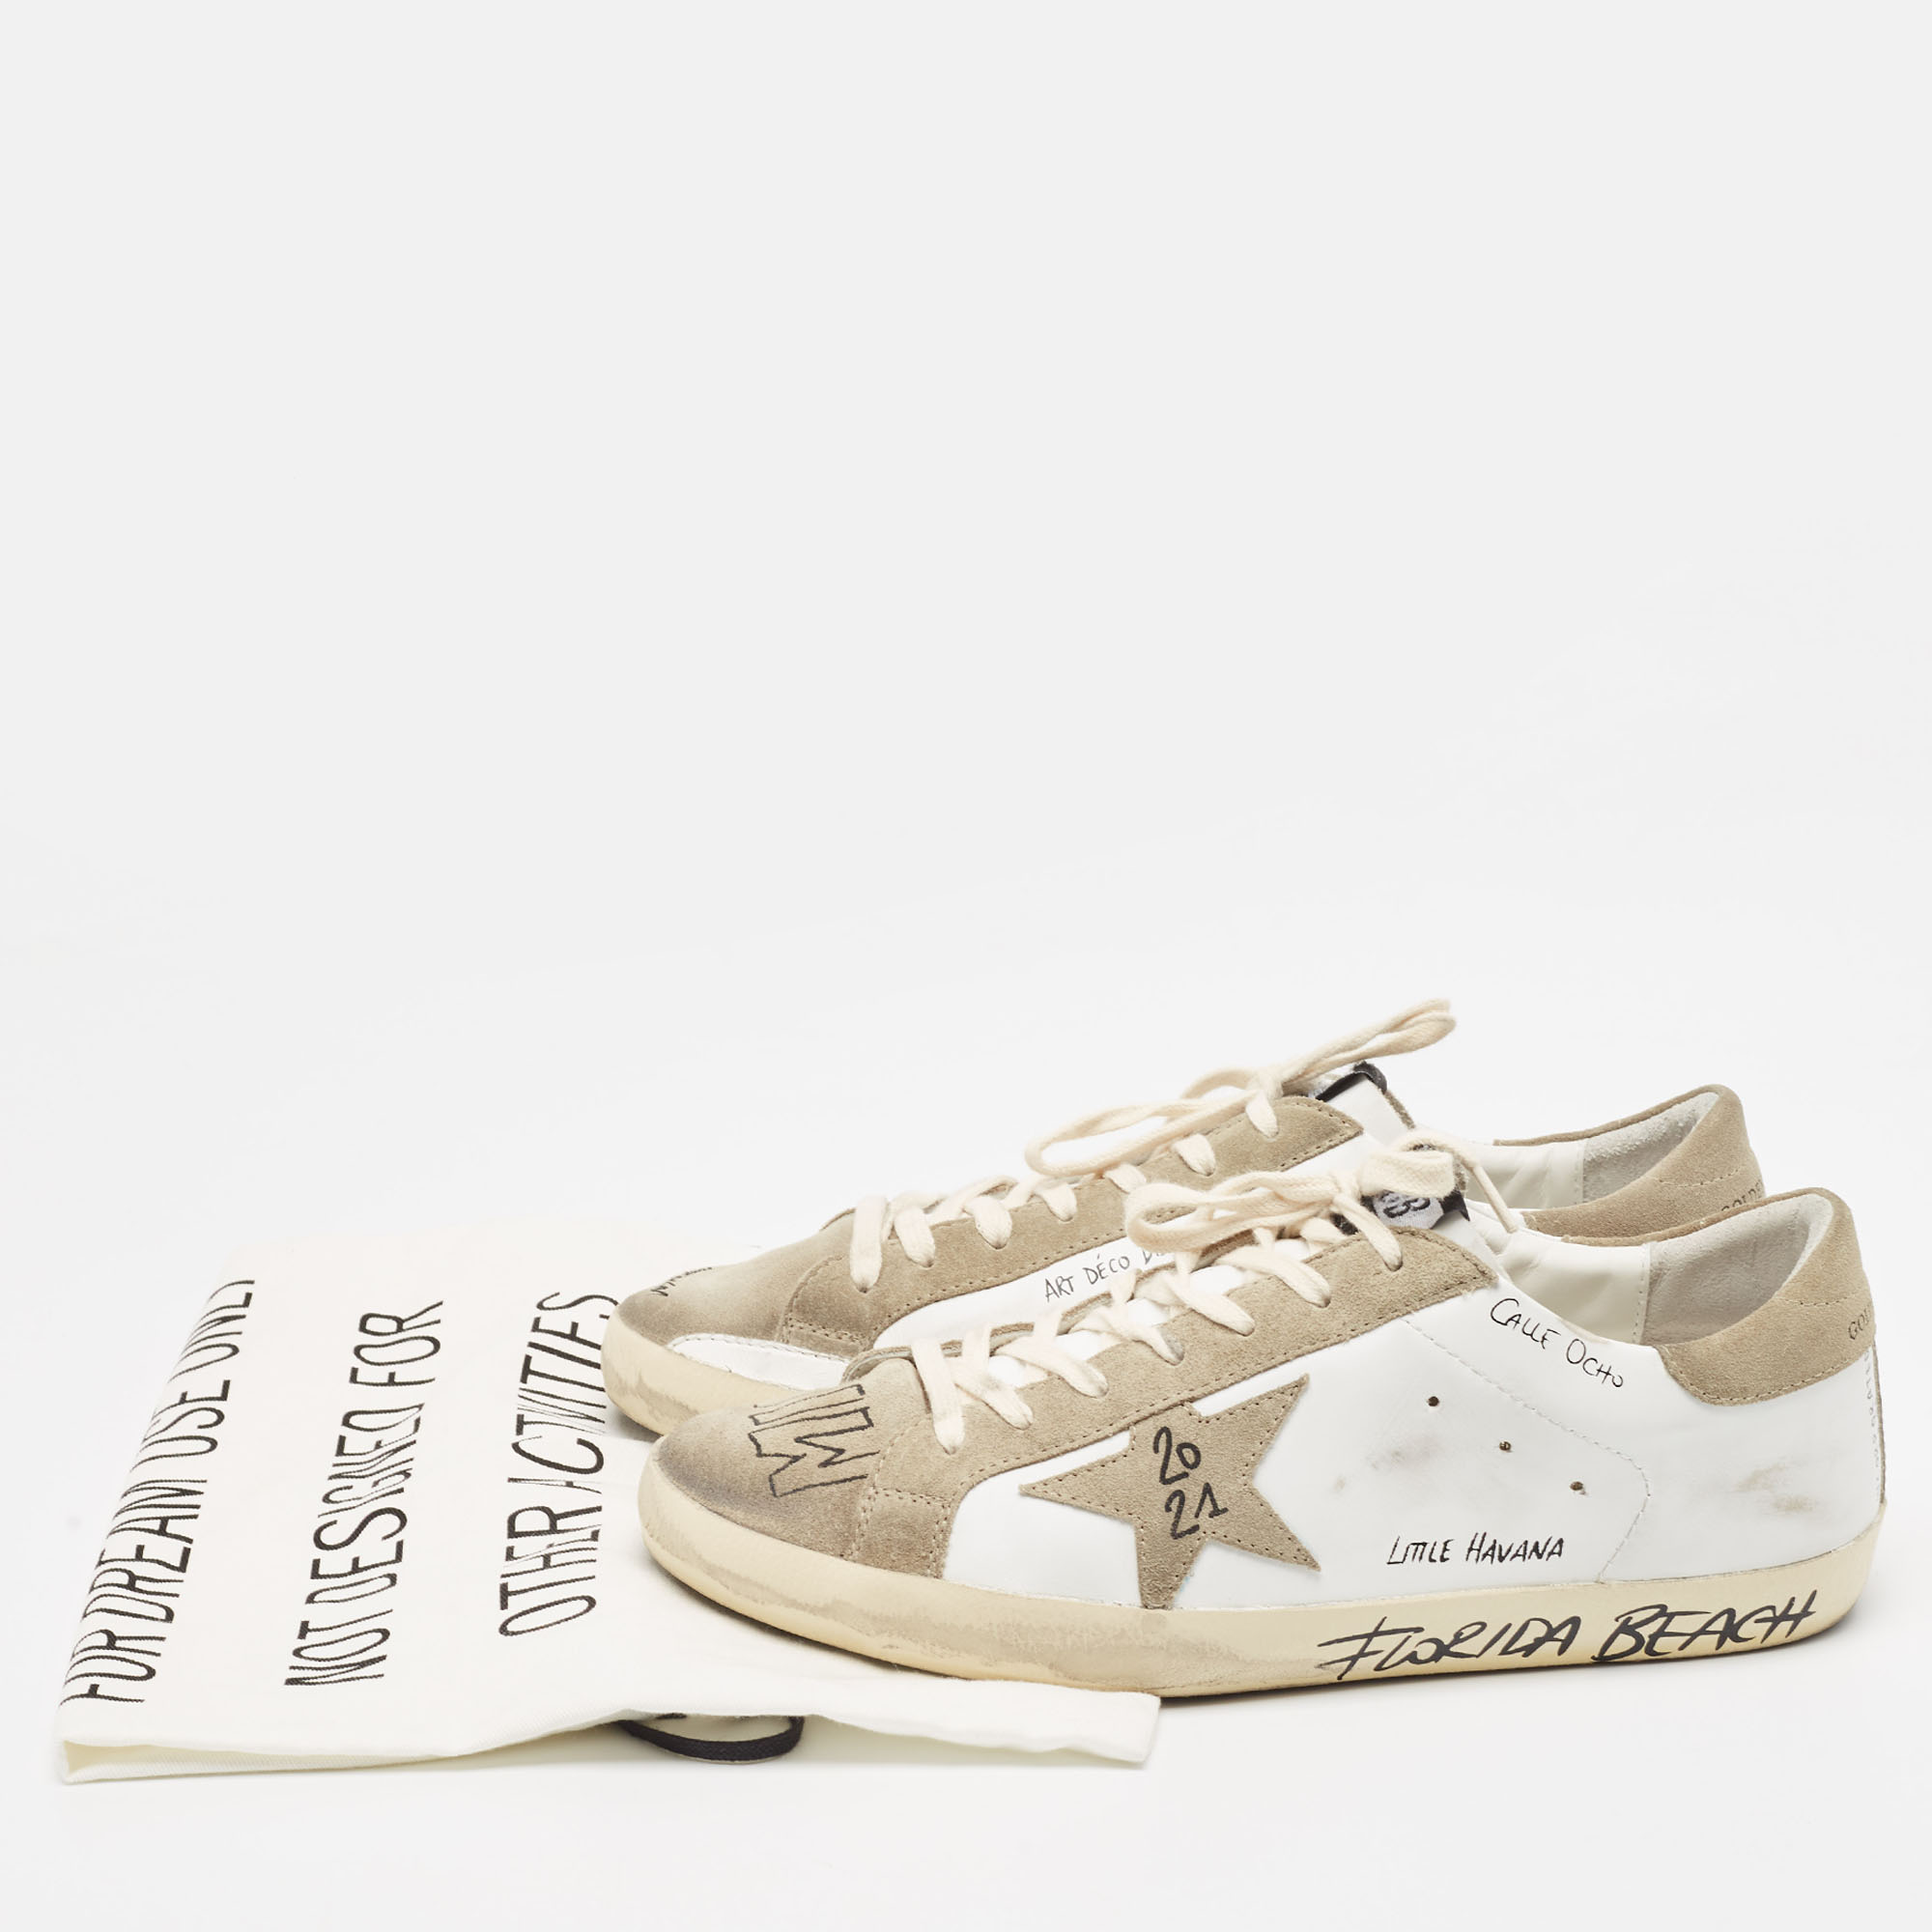 Golden Goose White/Grey Leather And Suede Superstar Sneakers Size 43